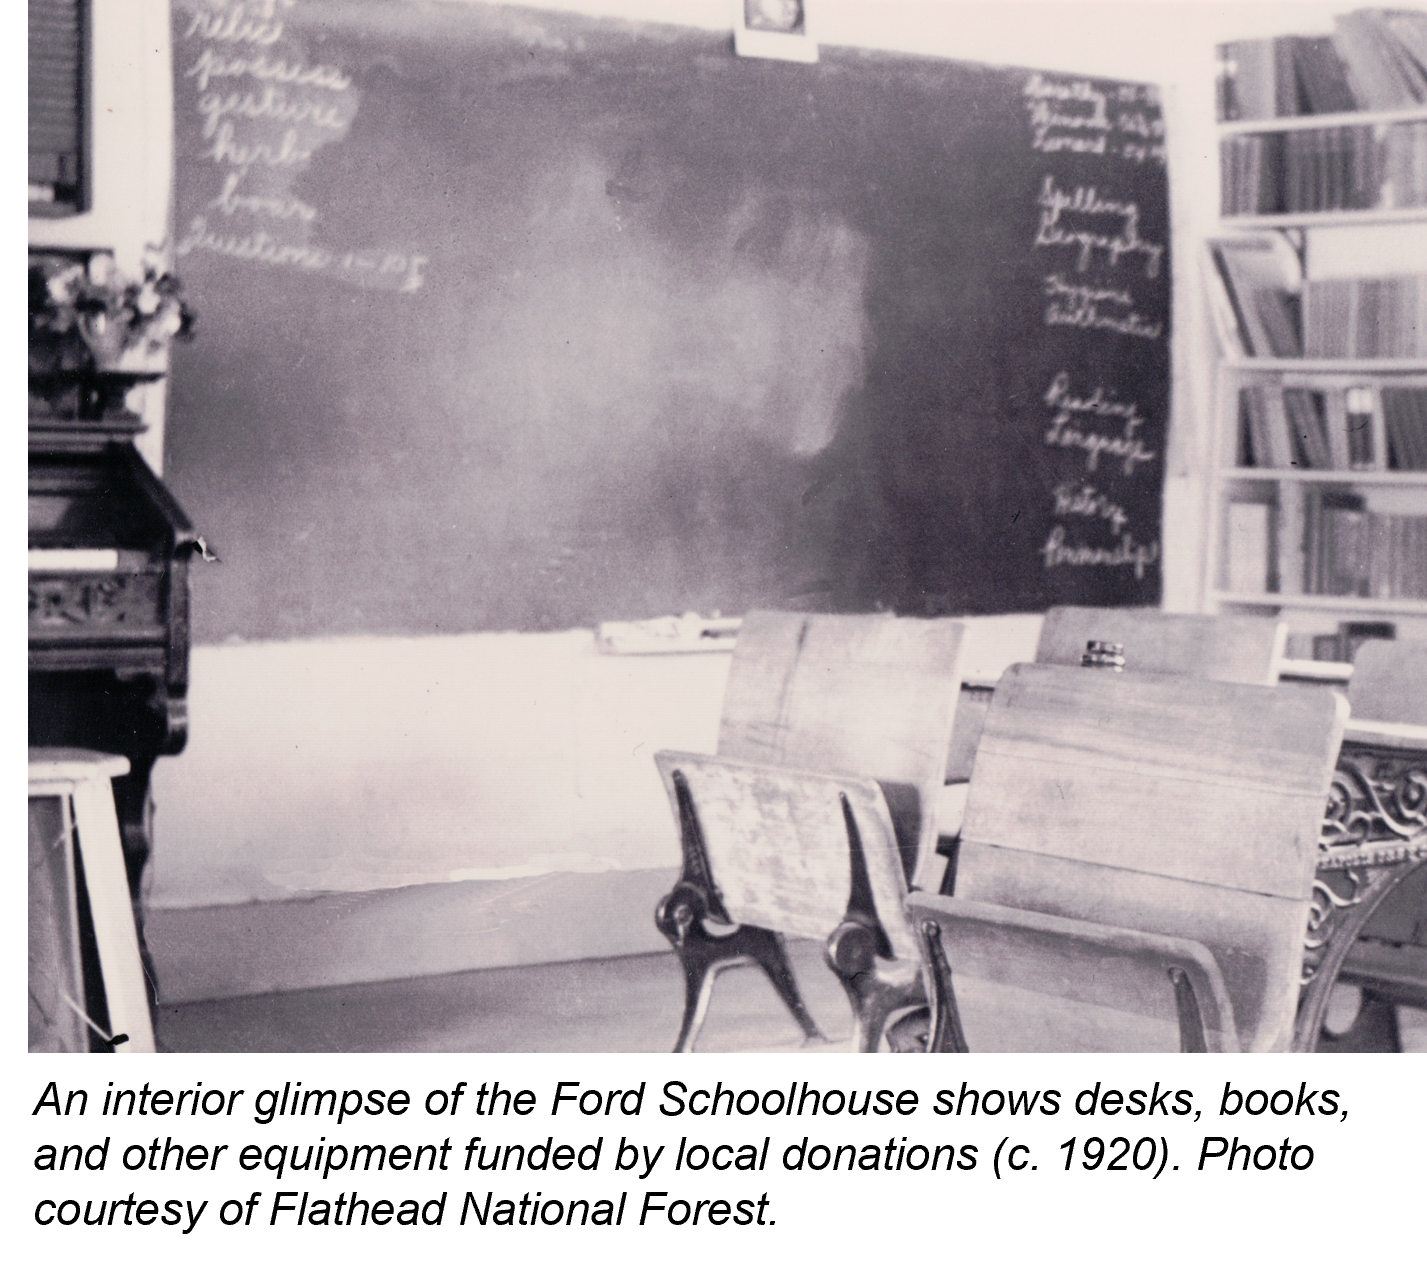 A 1920s glimpse inside Ford Schoolhouse shows desks, chalkboard, and books